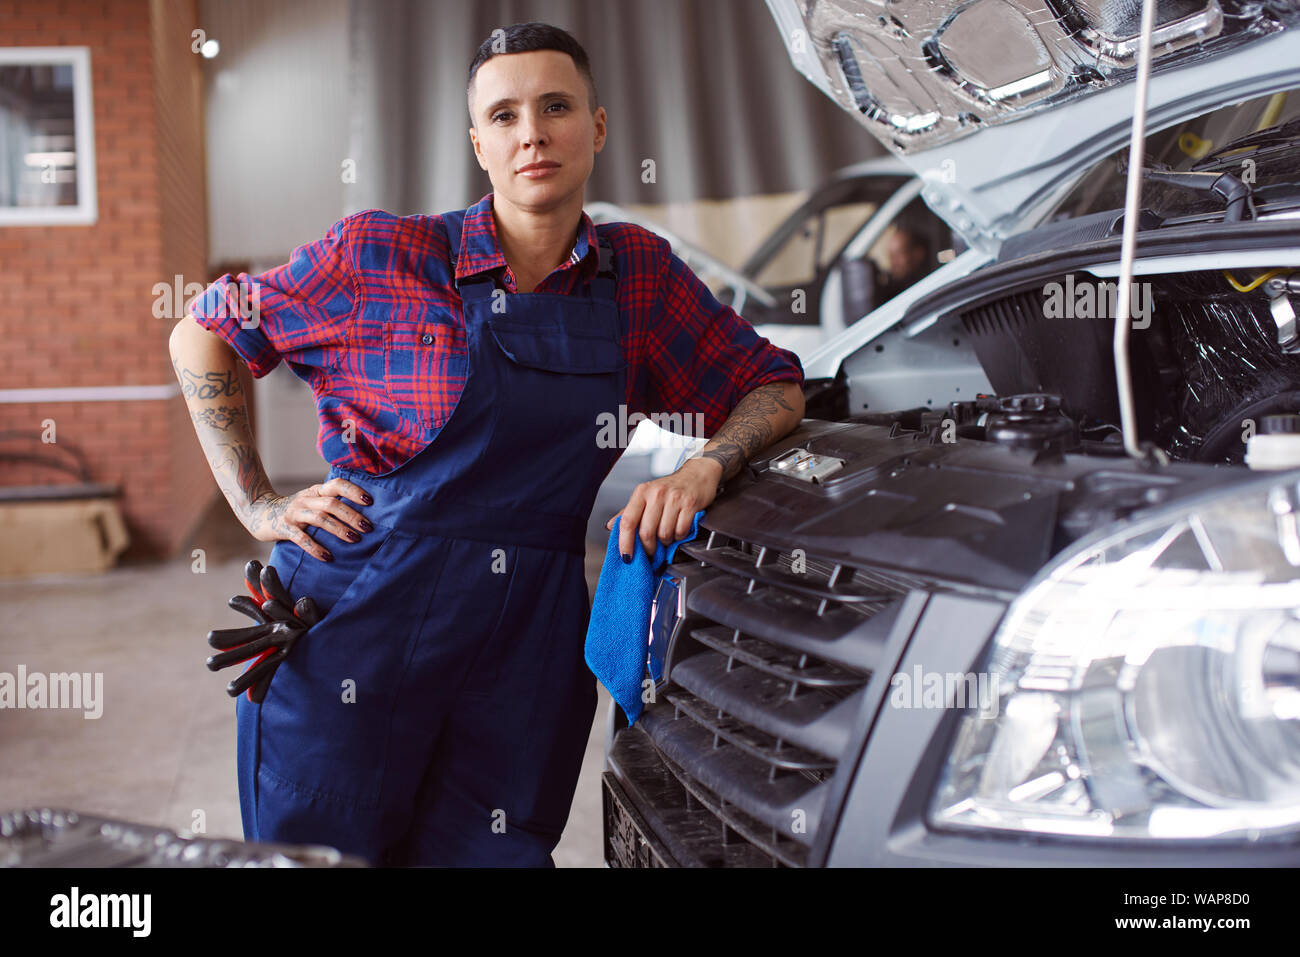 Vertical portrait of a woman automechanic standing next to a broken truck as she is cought in the middle of the working process. Stock Photo